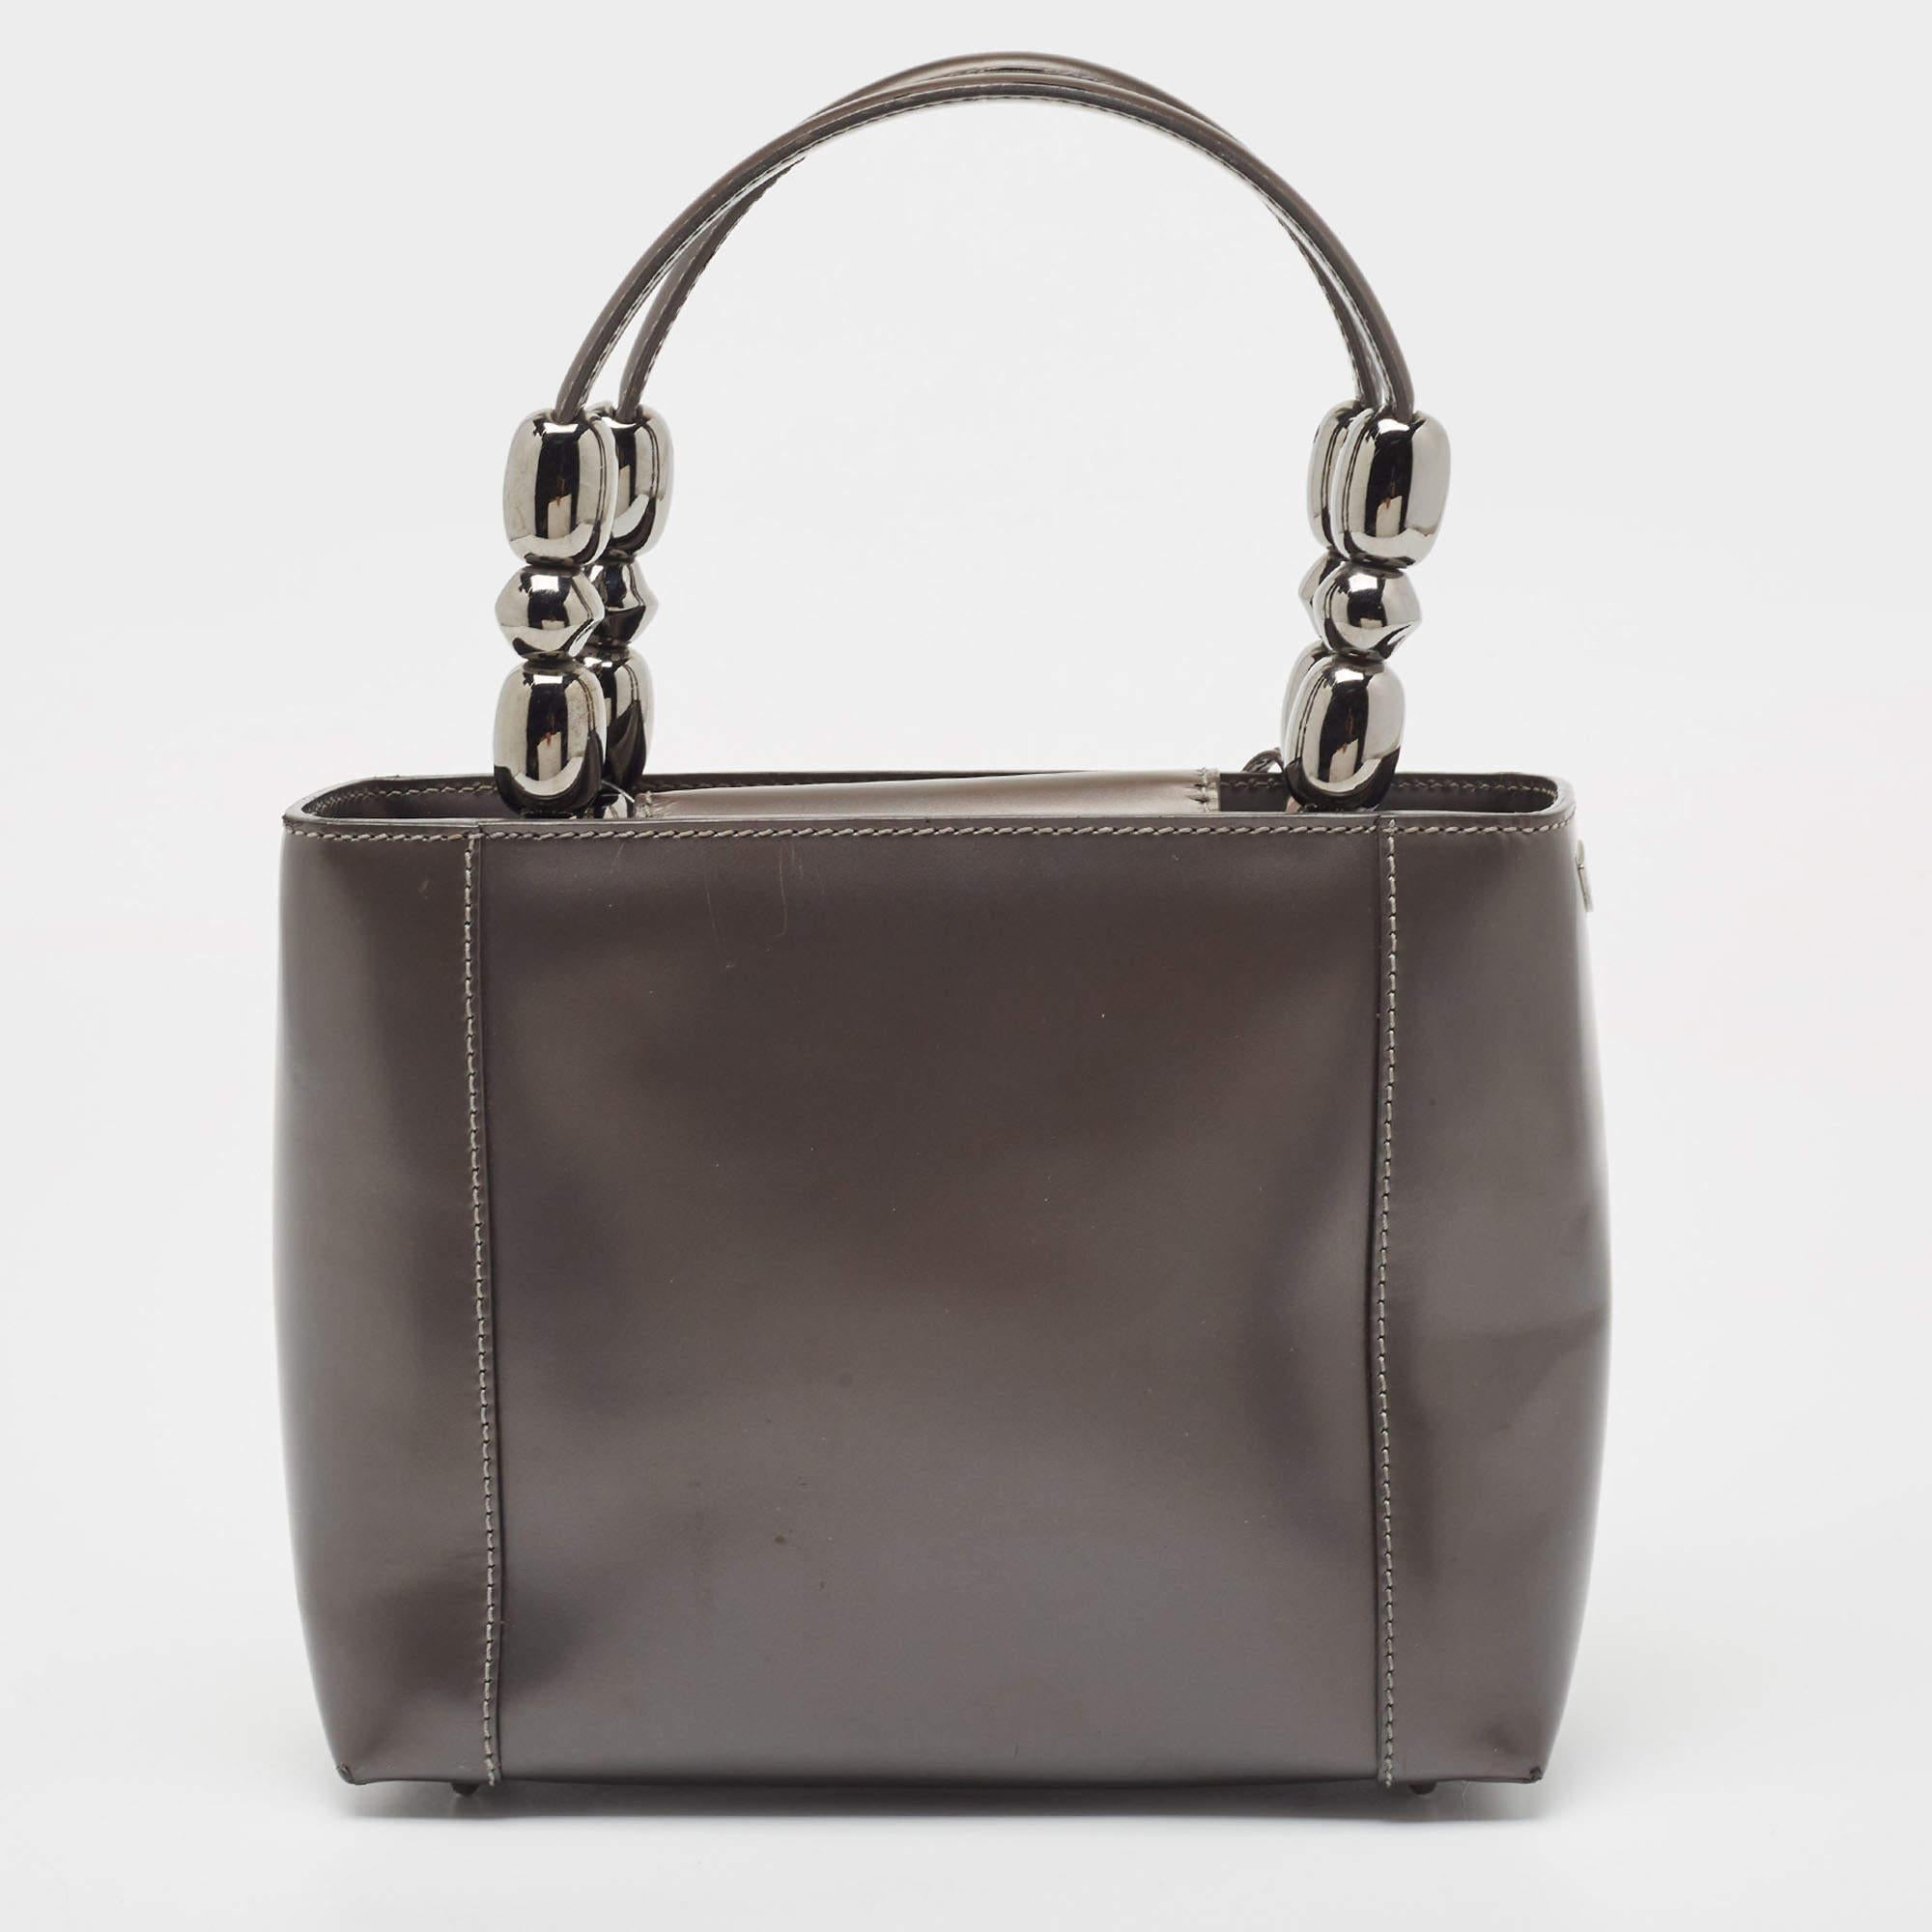 Straight from the house of the world’s most luxurious couturiers, this Malice tote has come your way with an elegant and sophisticated style. Boasting an ultra-feminine appeal with well-designed handles, this chic bag will add a dose of glamour to